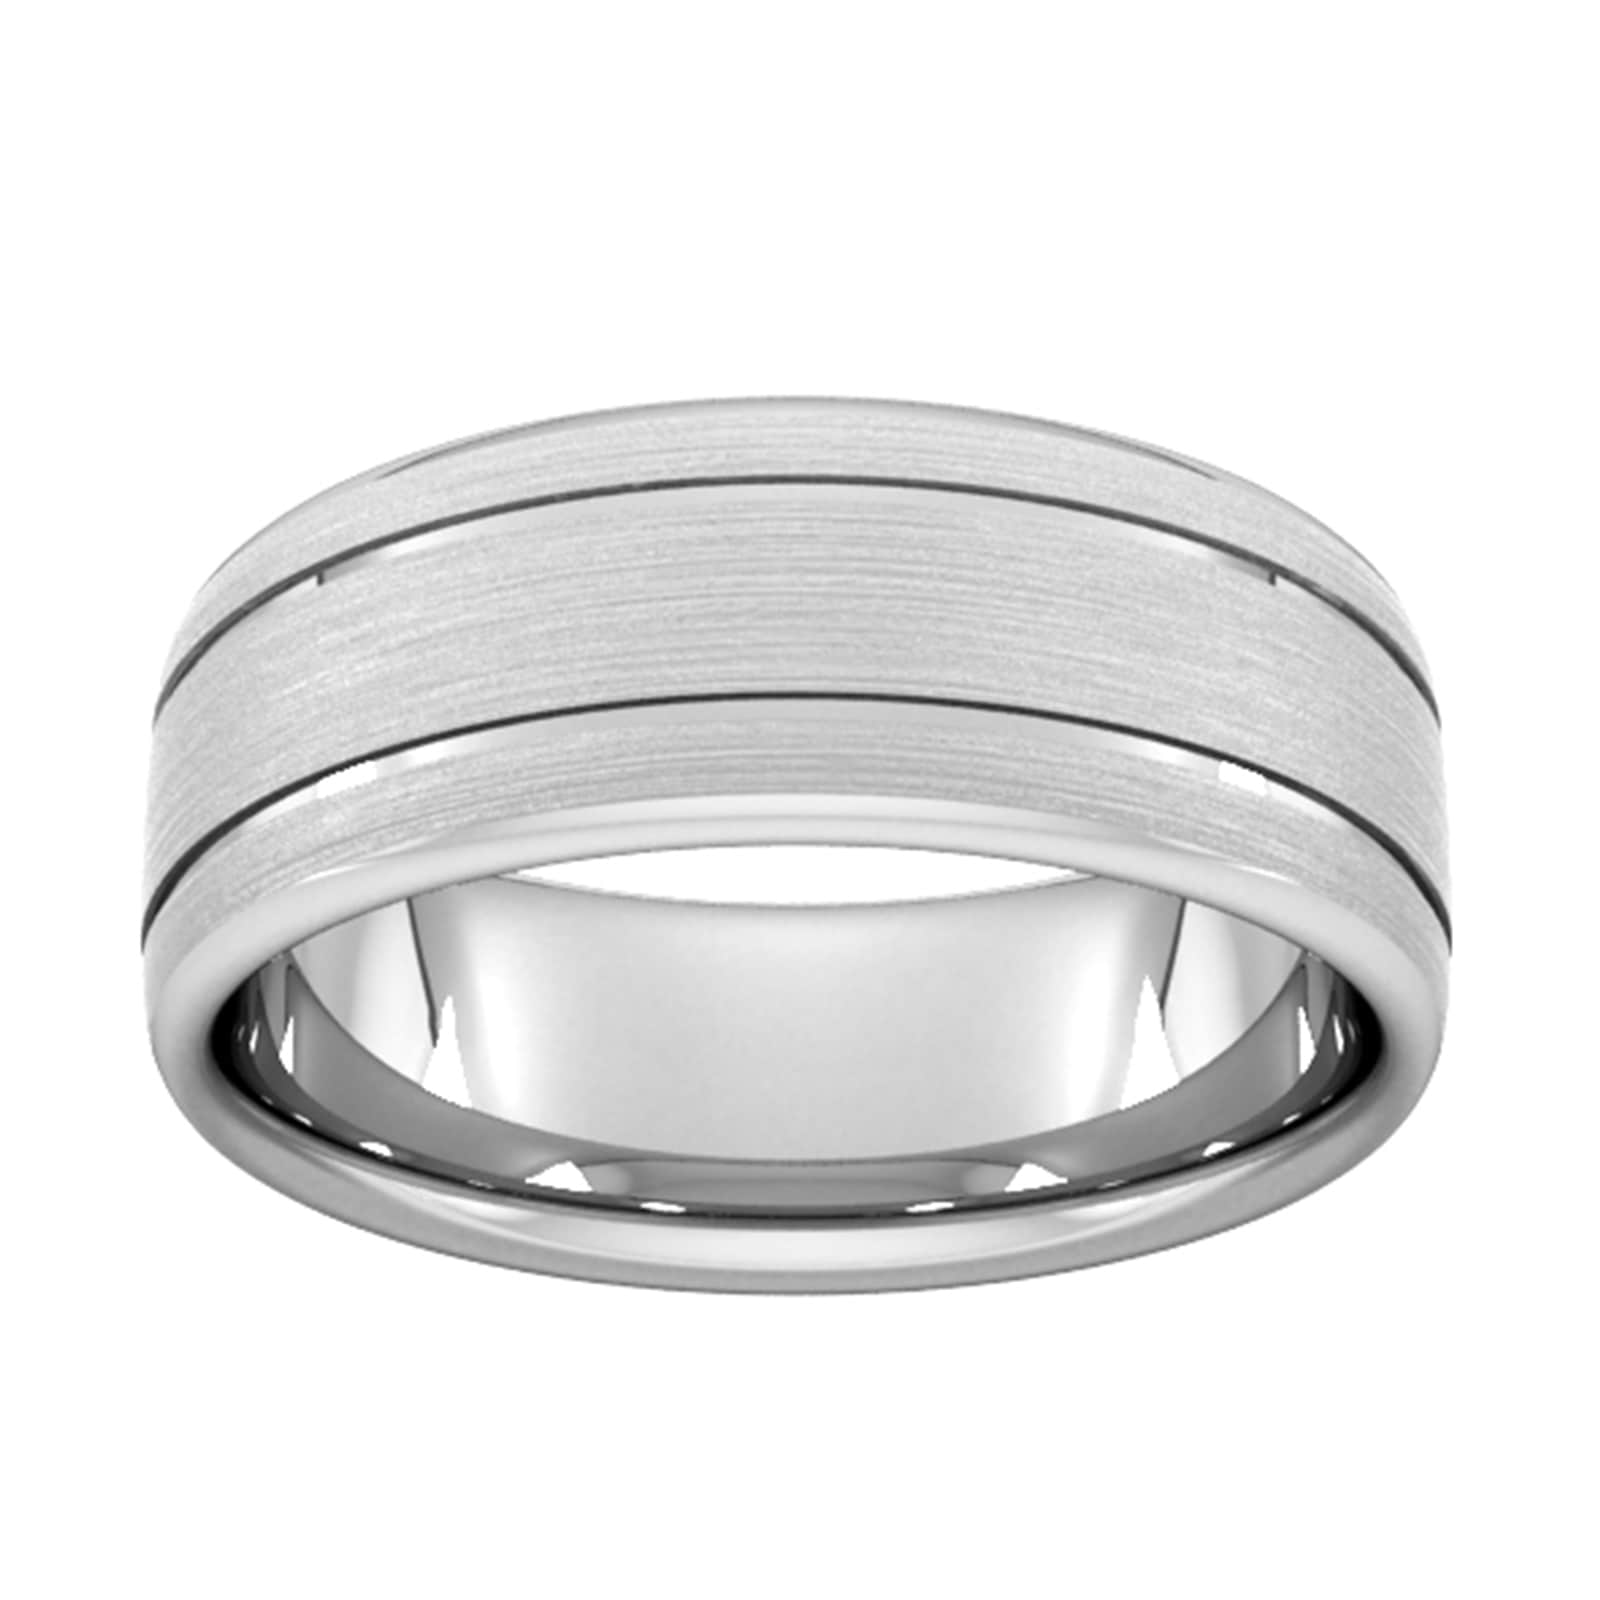 8mm Traditional Court Heavy Matt Finish With Double Grooves Wedding Ring In Platinum - Ring Size U